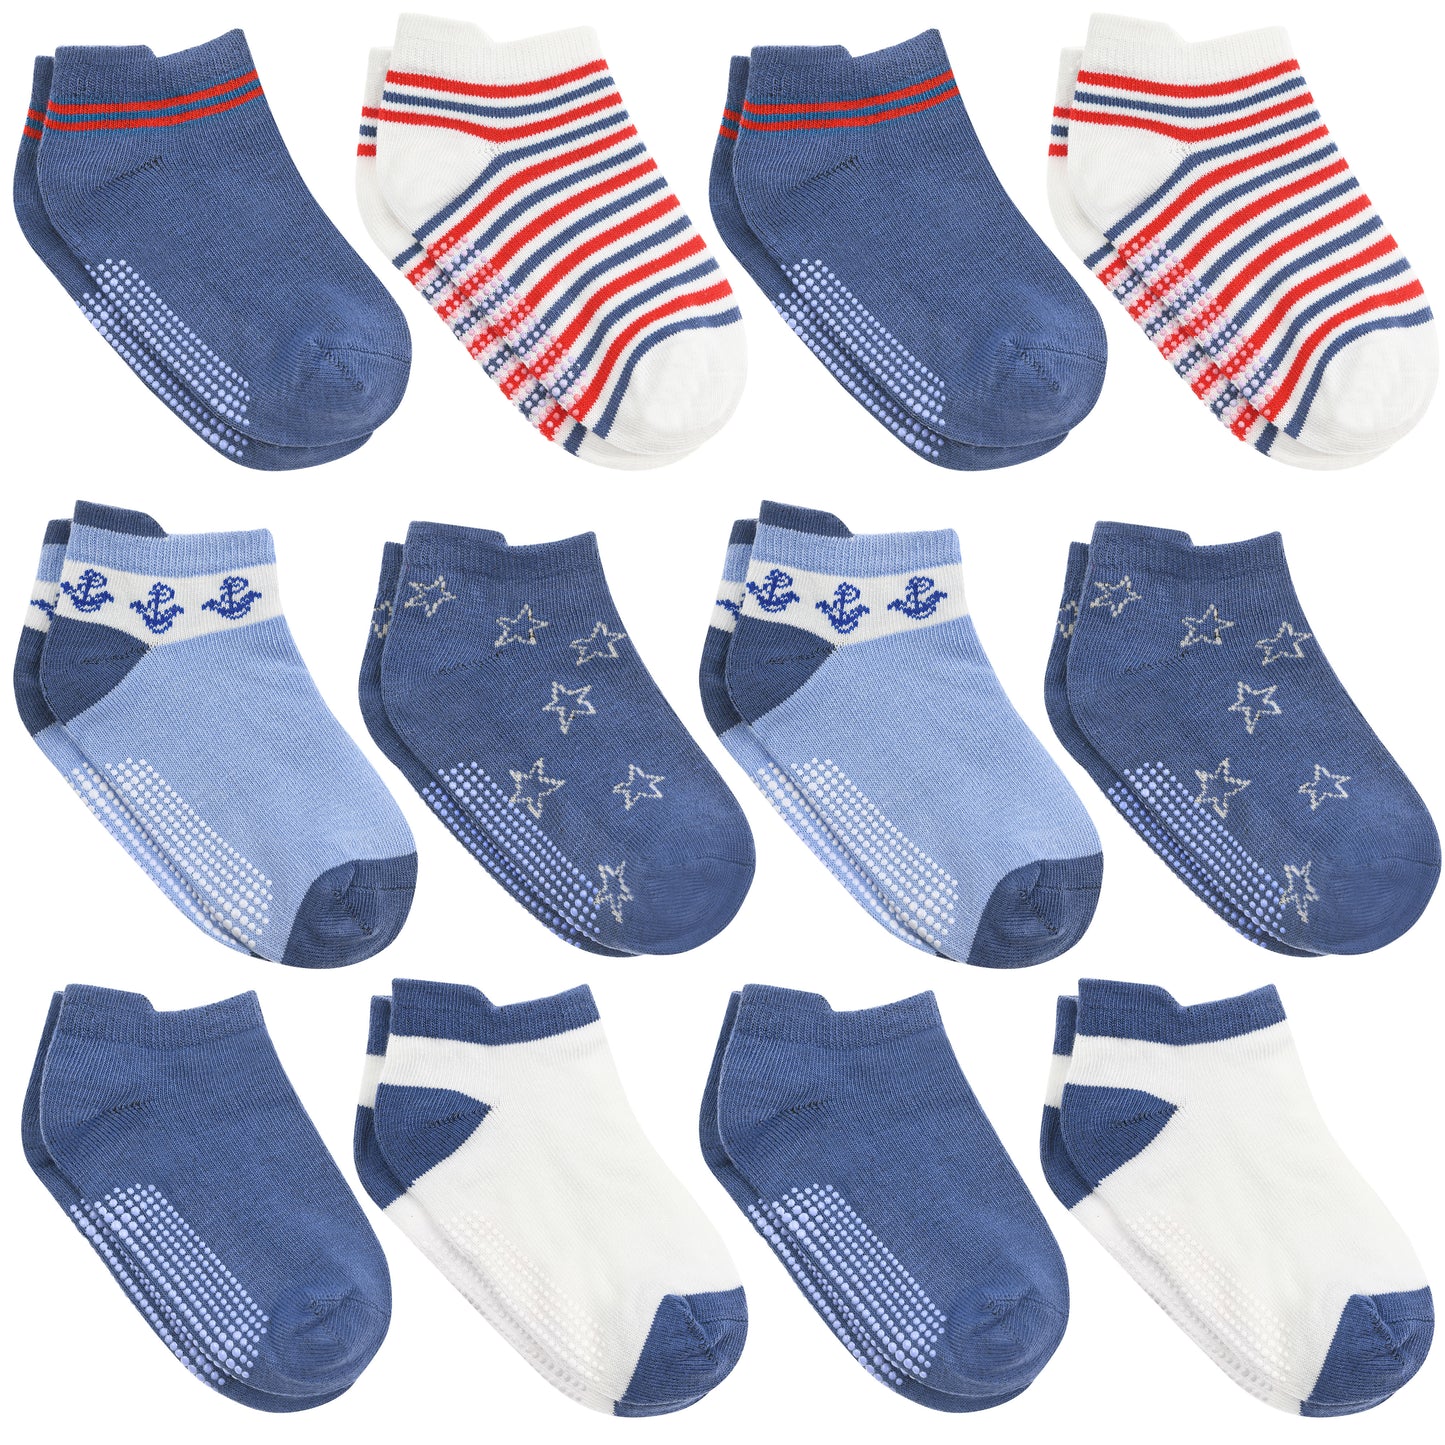 Baby and Toddler Ankle Socks- 12 Pairs